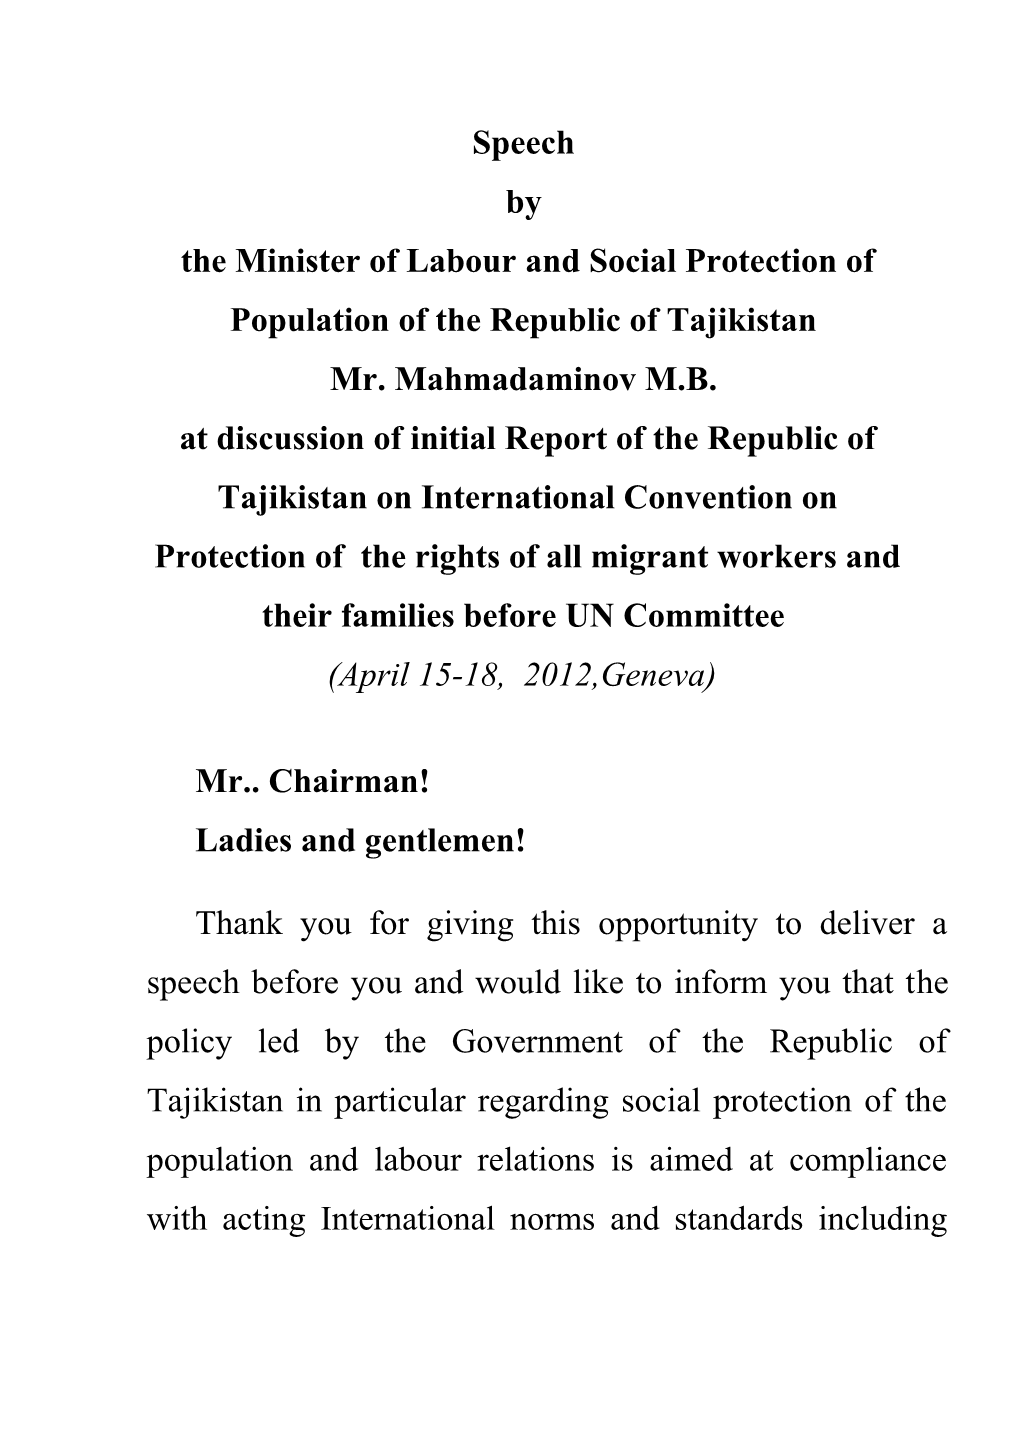 The Minister of Labour and Social Protection of Population of the Republic of Tajikistan